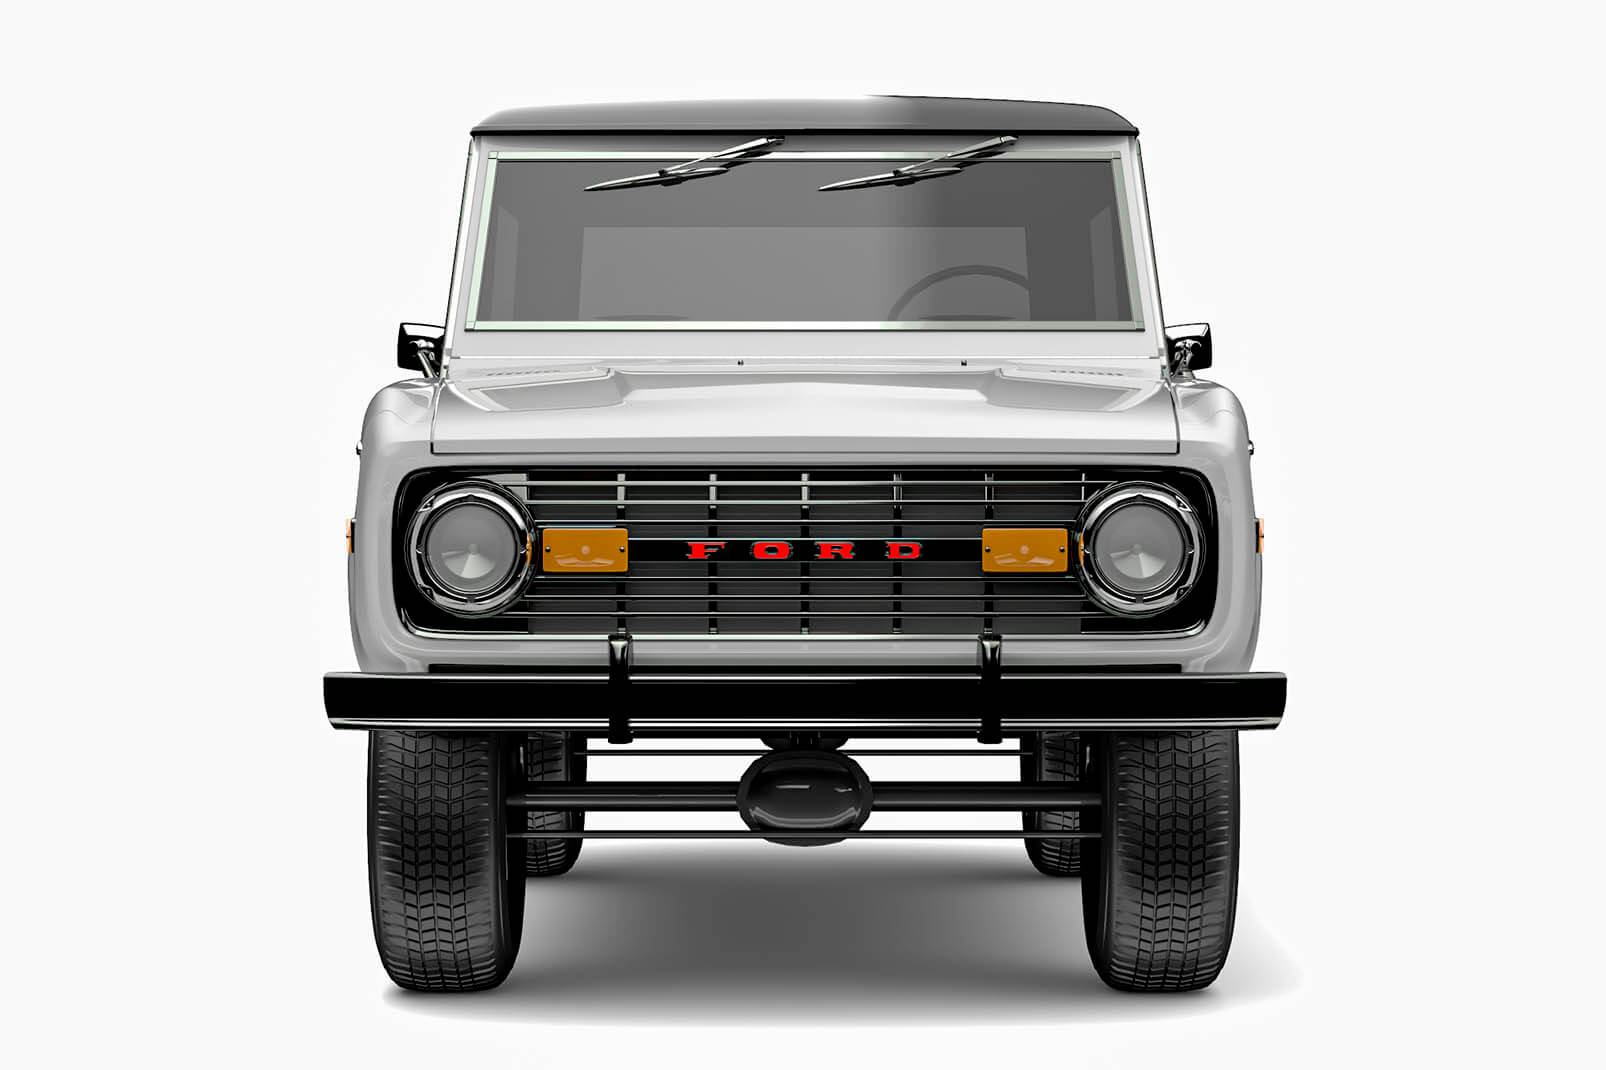 CGI Visualization Ford Bronco MK1 - Restomod by Studio Powers - An independent CGI Studio Based in Singapore Specializing In Product Visualization.